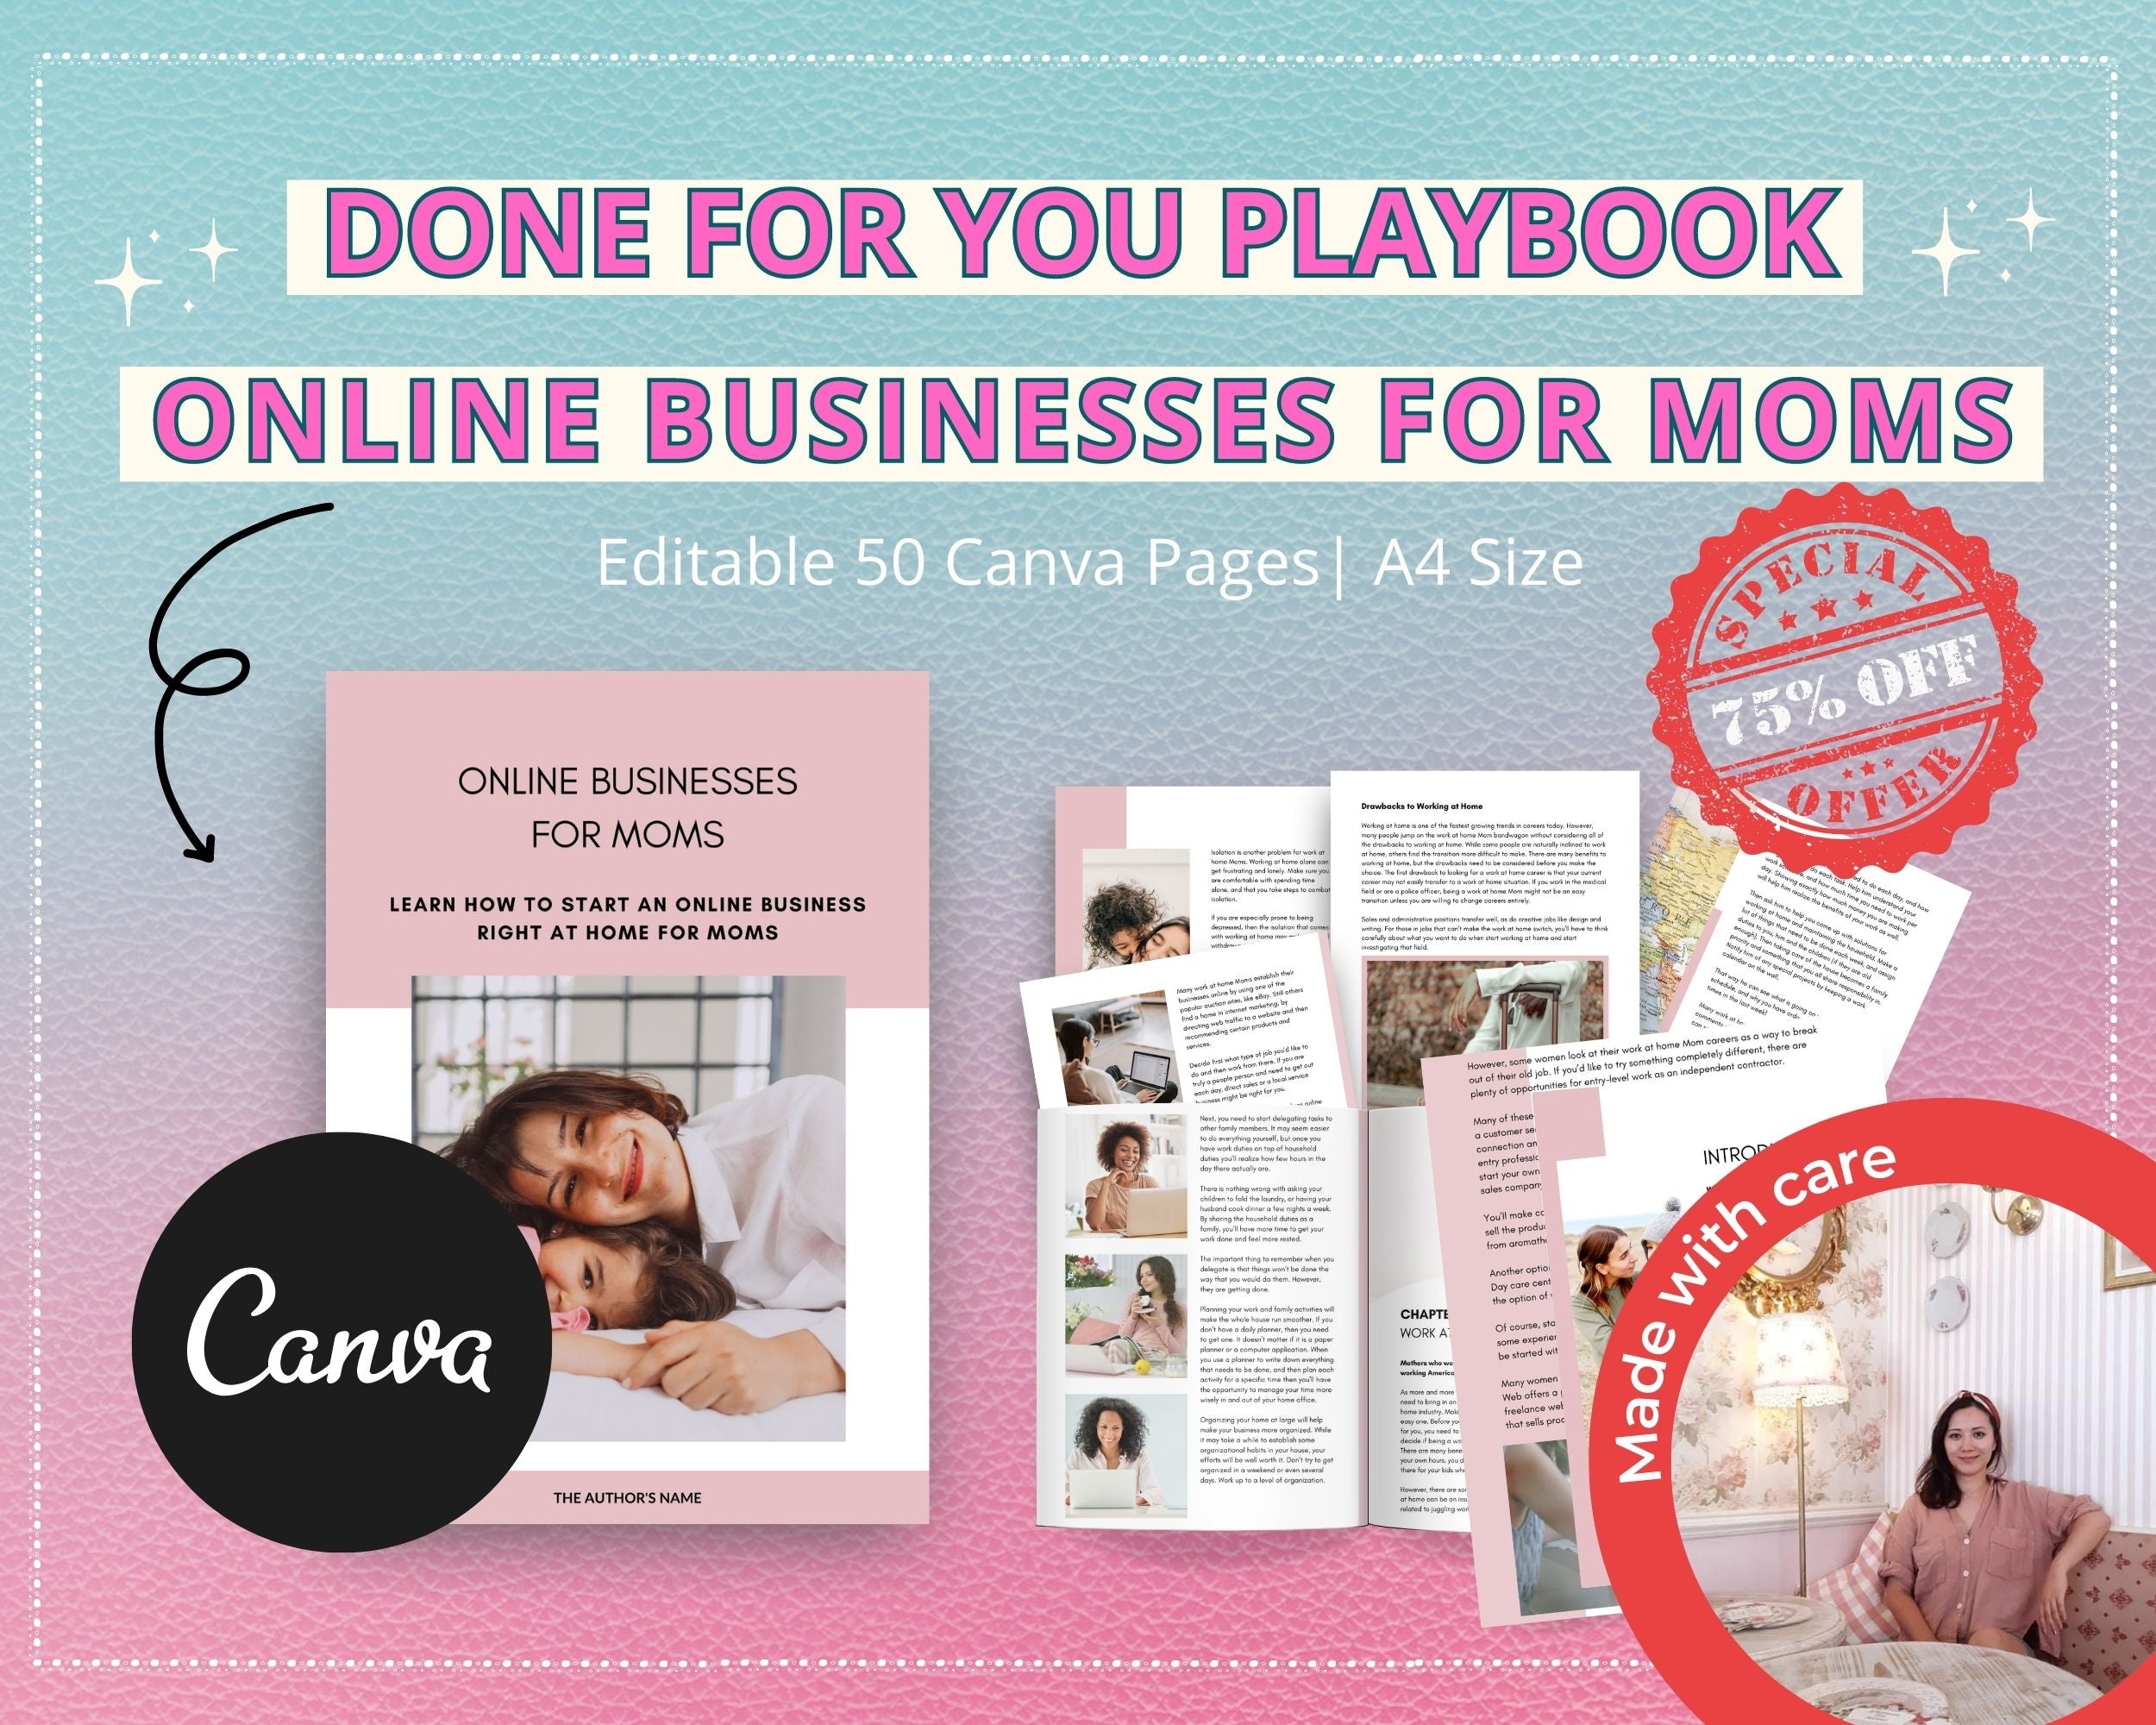 Online Businesses For Moms Playbook in Canva